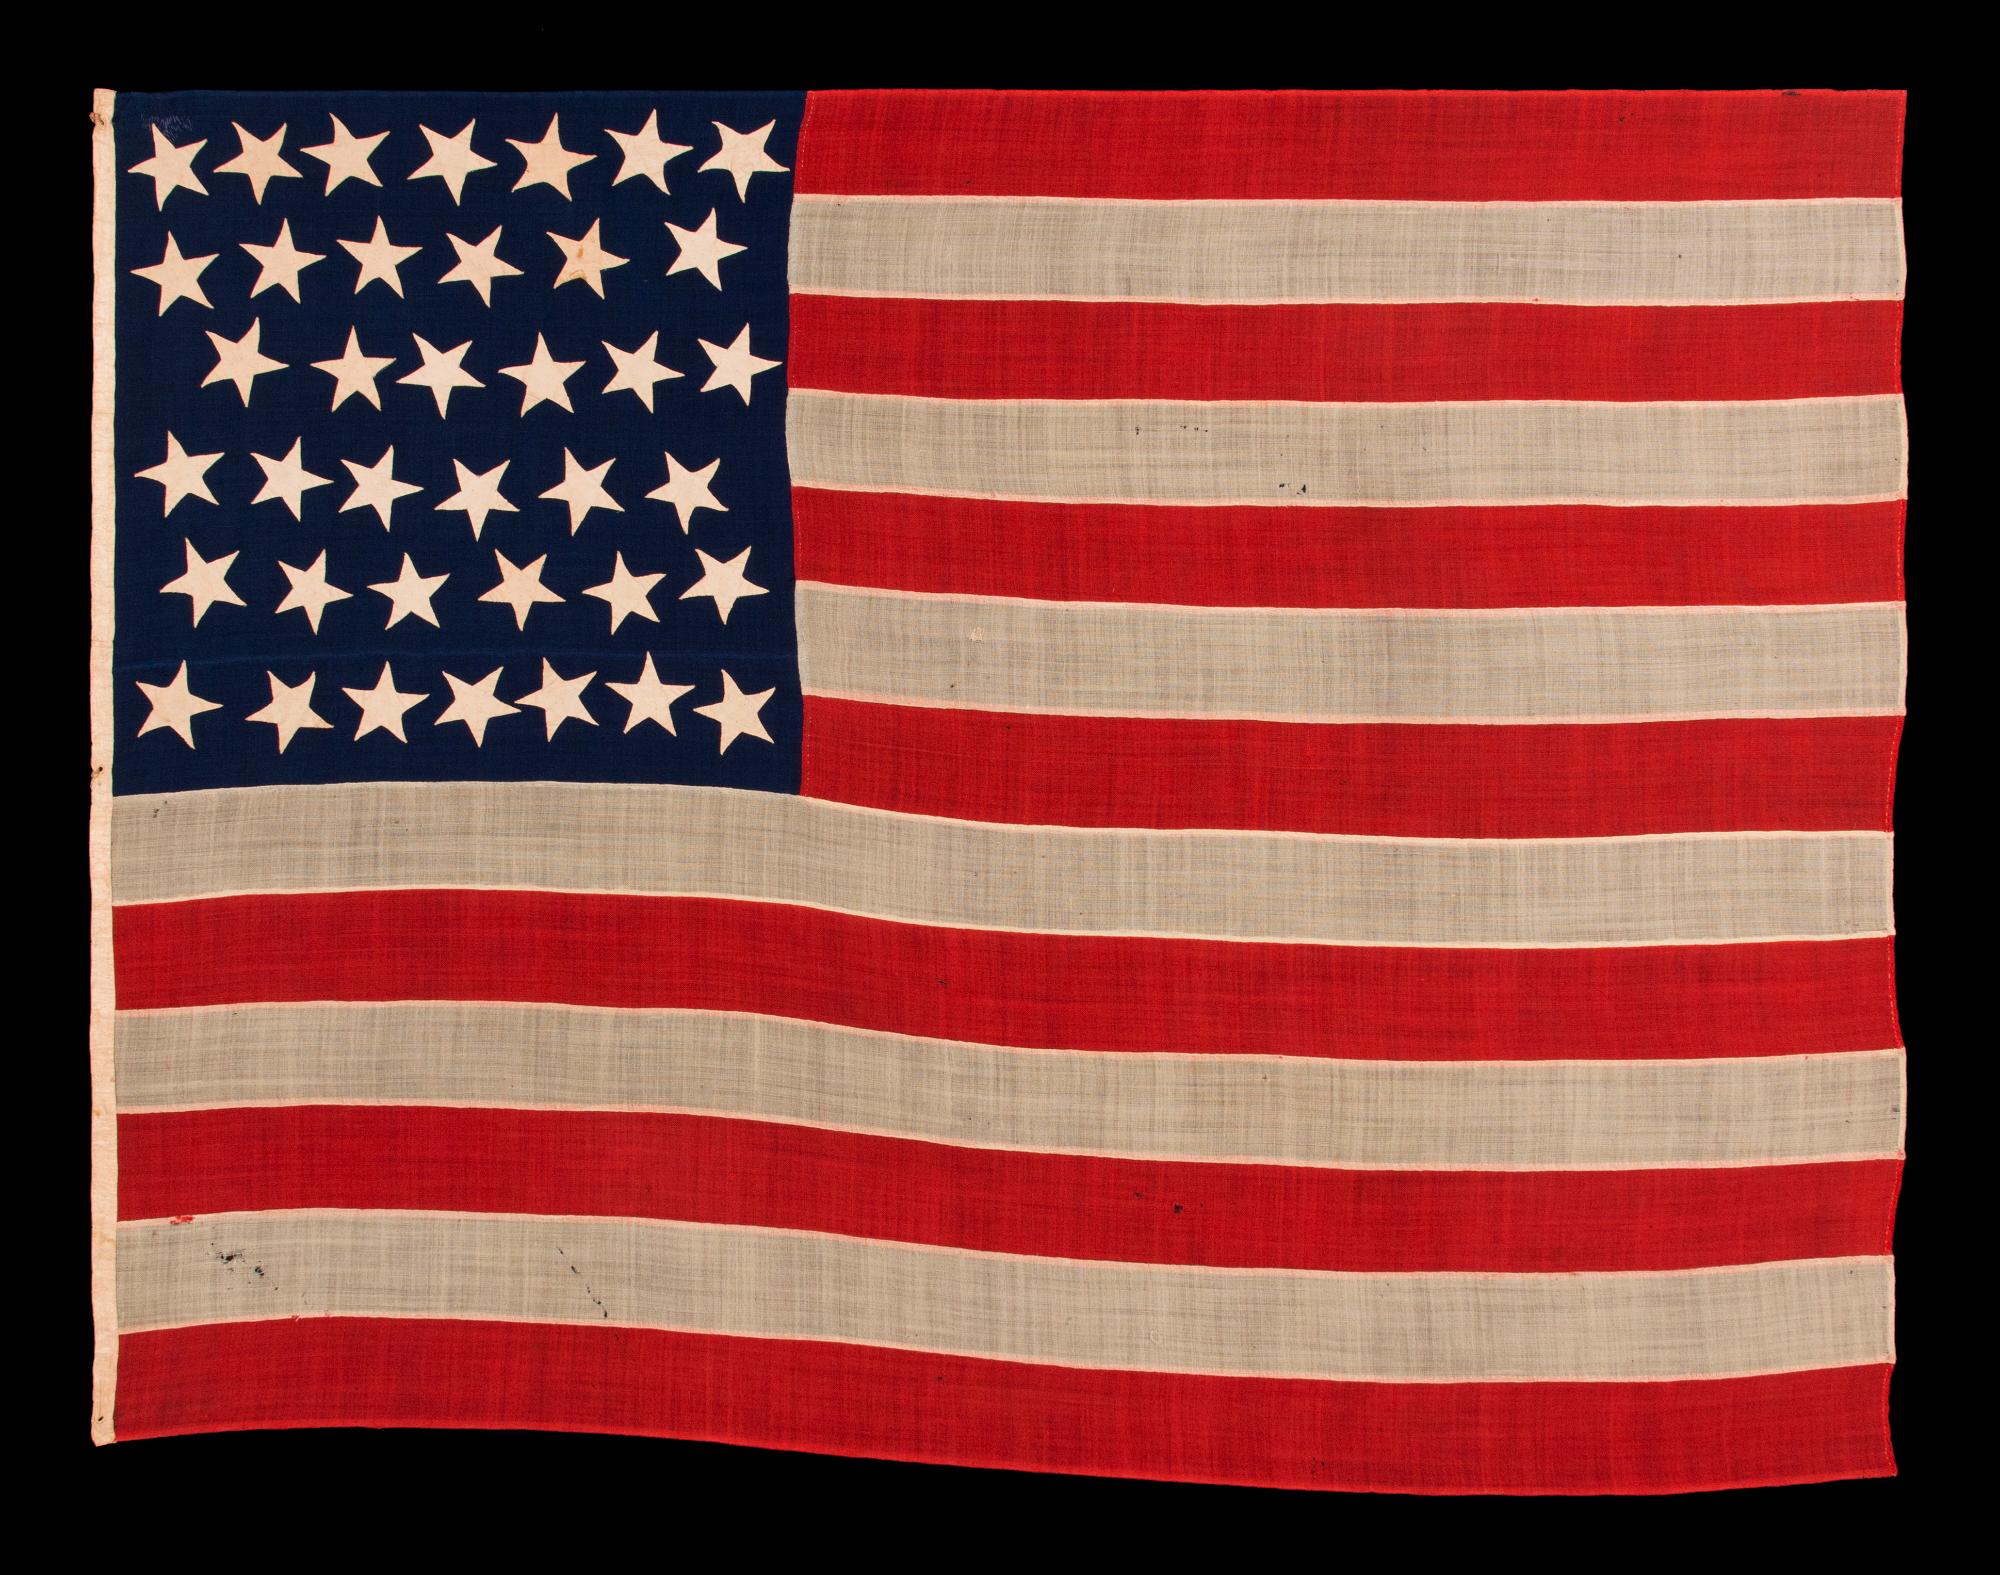 Entirely hand sewn, 38 Star, antique American flag of the Indian wars period, with a Squarish profile and a canton that is taller than it is wide, similar to U.S. infantry and artillery battle flags, and with an especially graphic presentationof